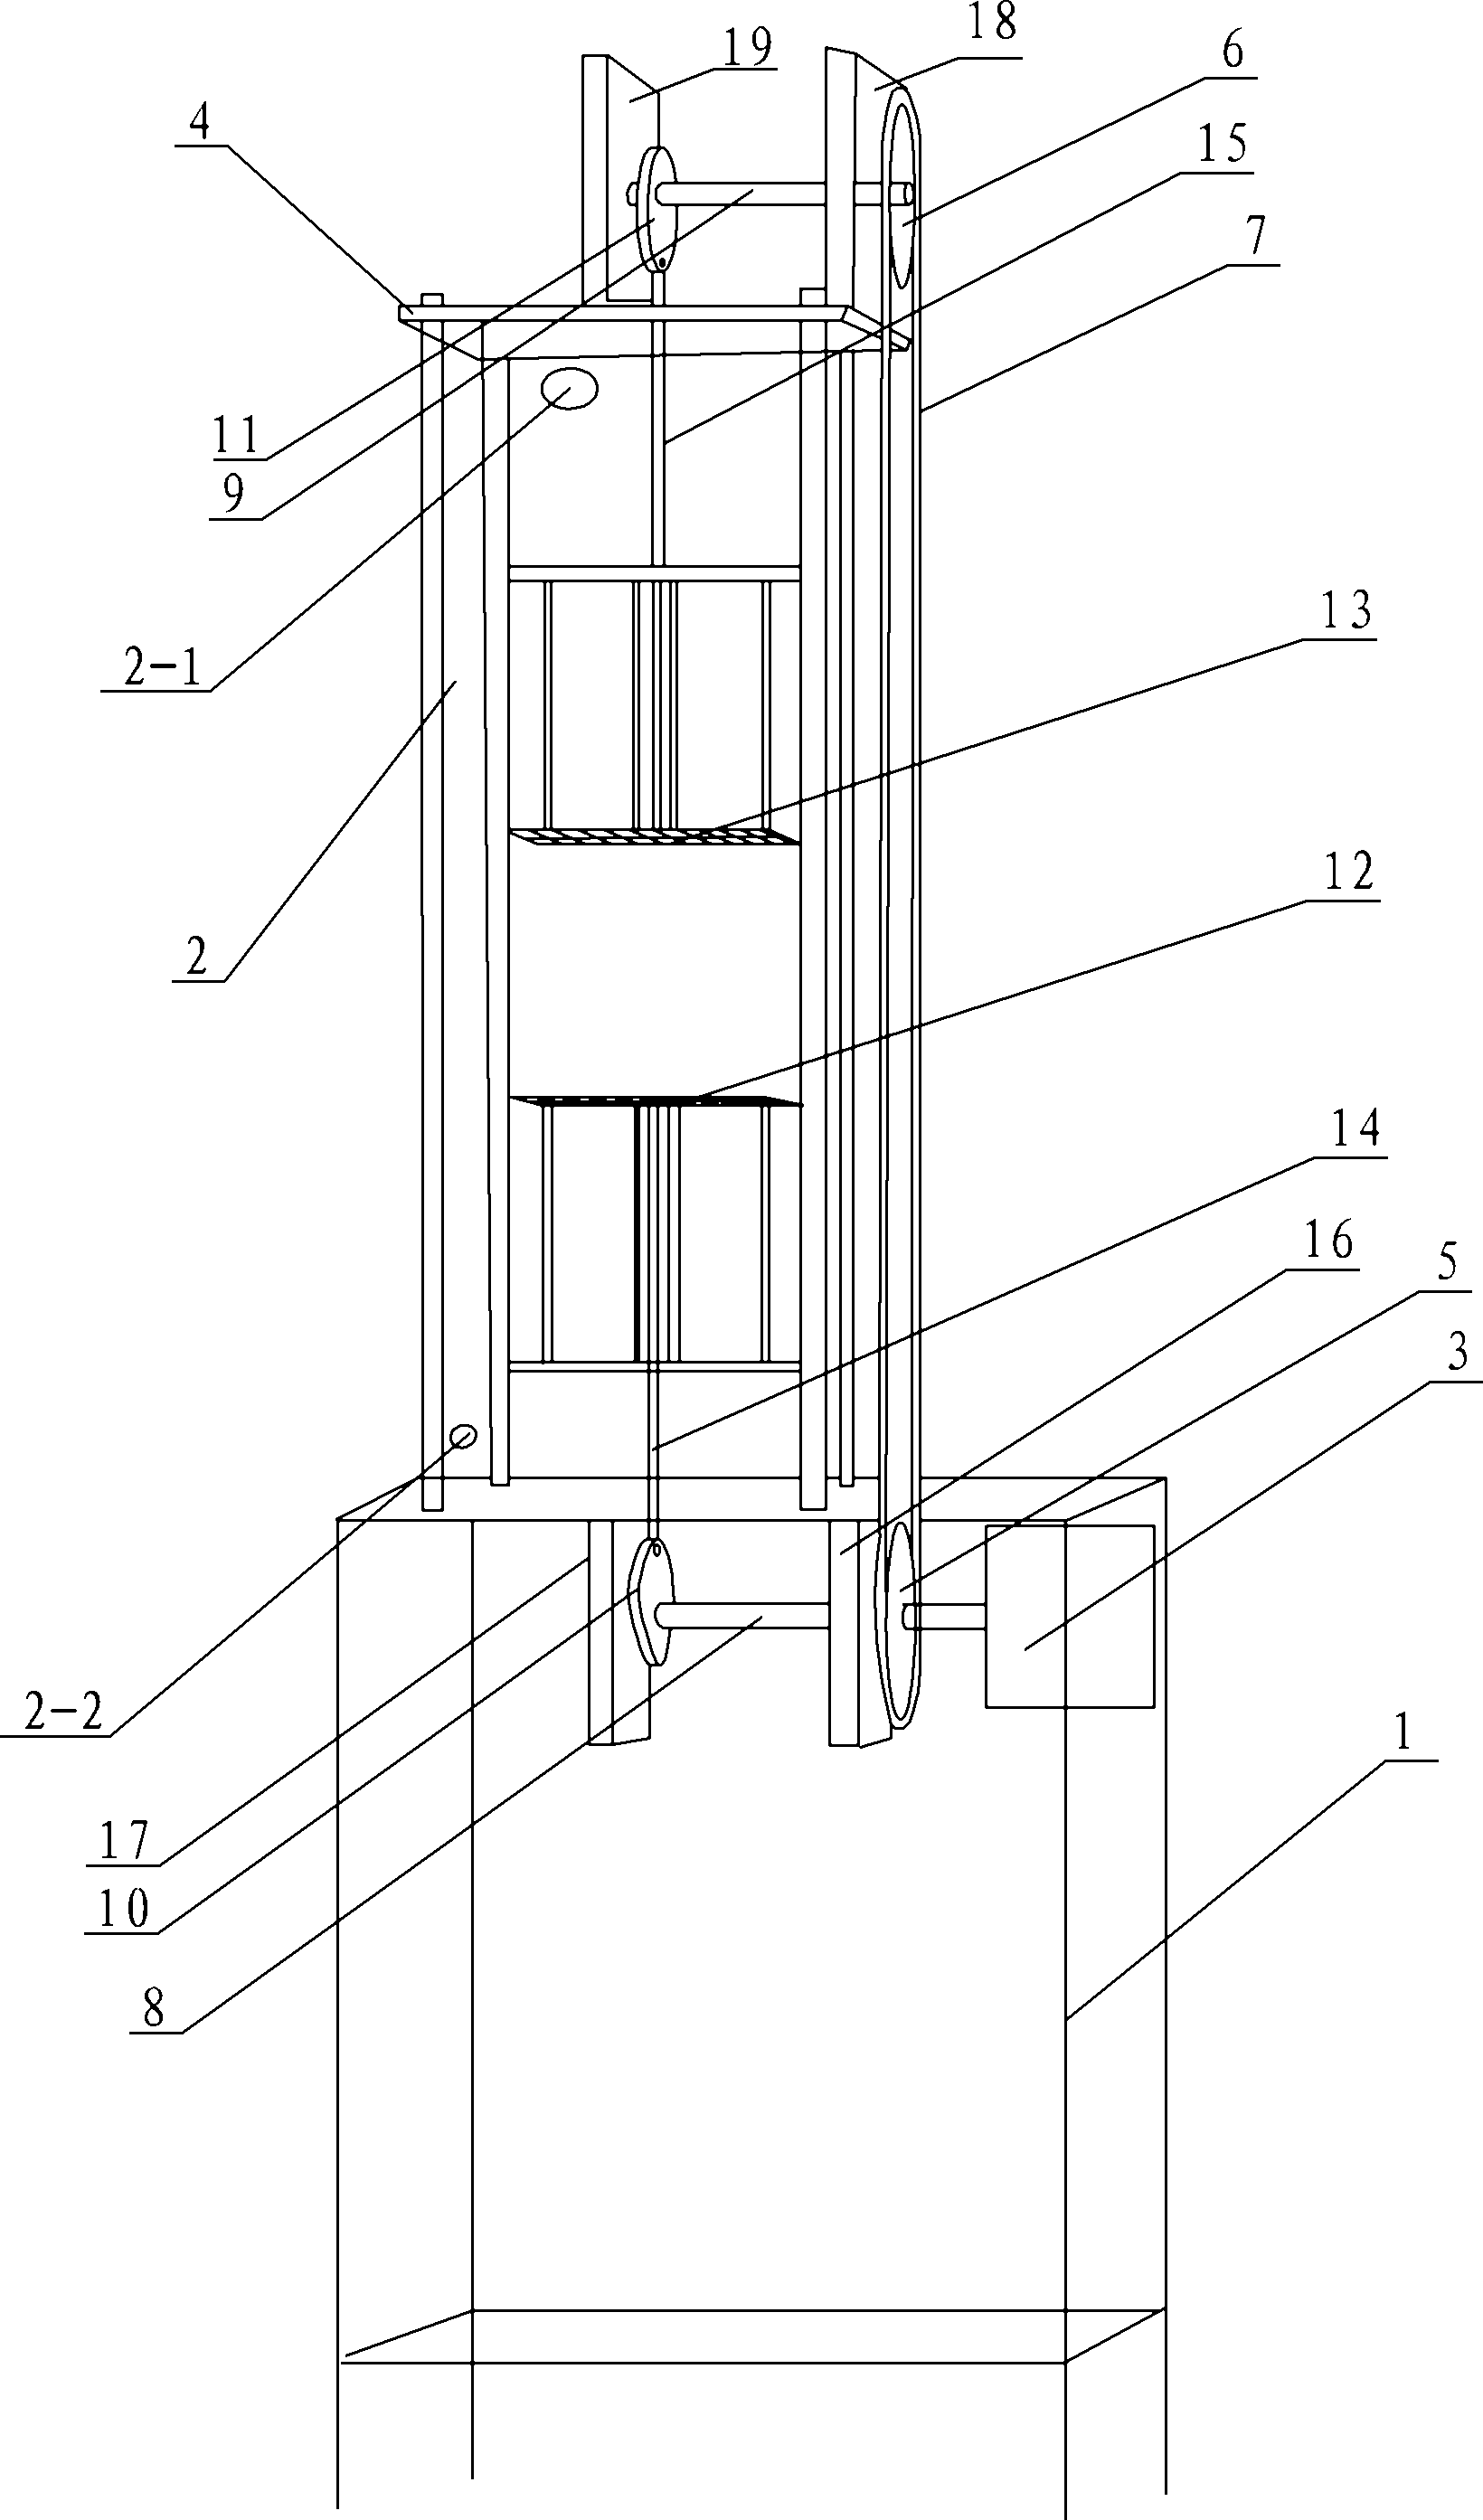 Forced isotropic turbulence experimental apparatus